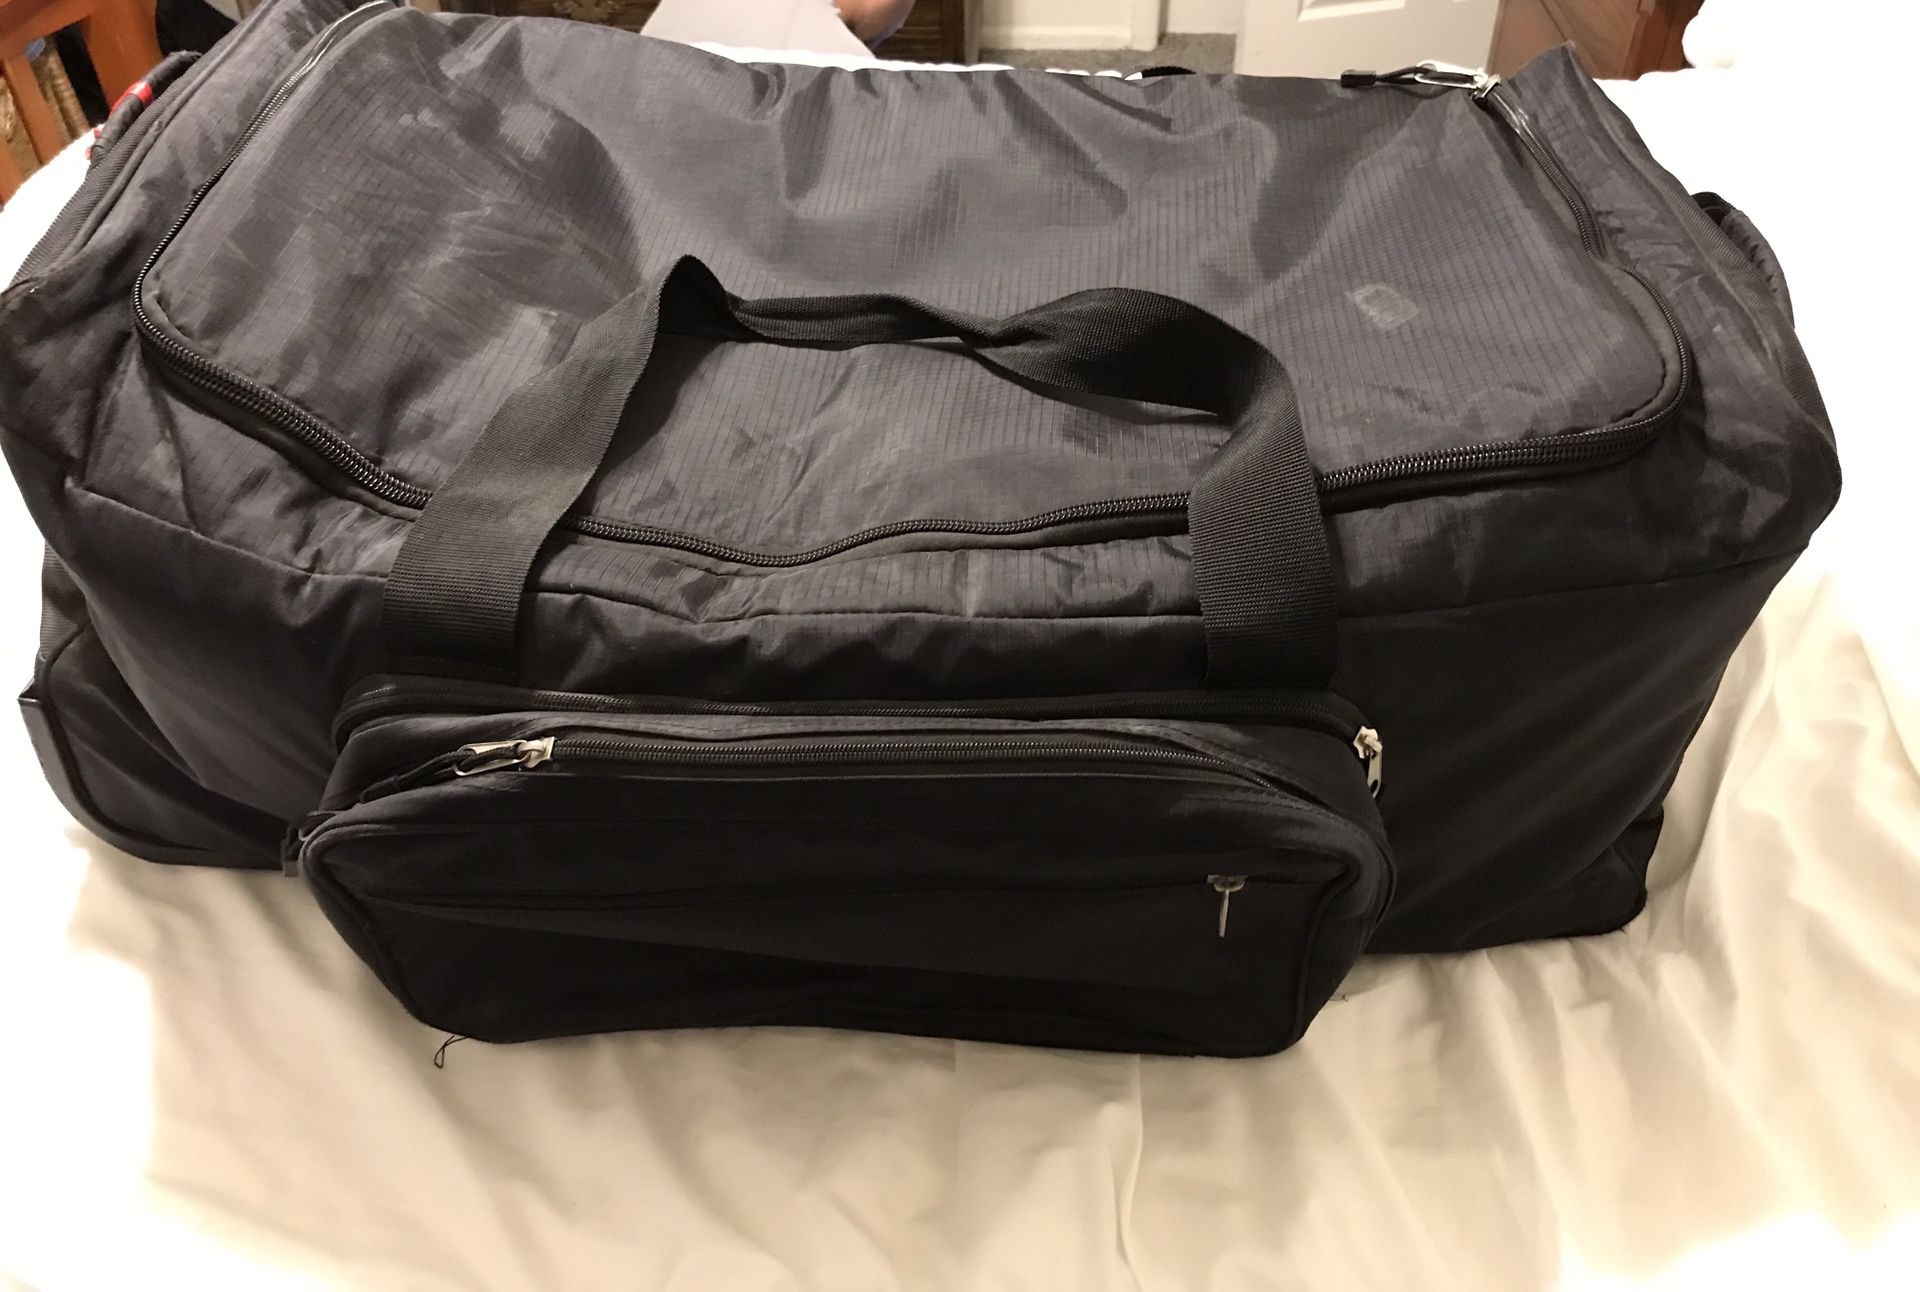 Large Military Duffel Bag with Wheels